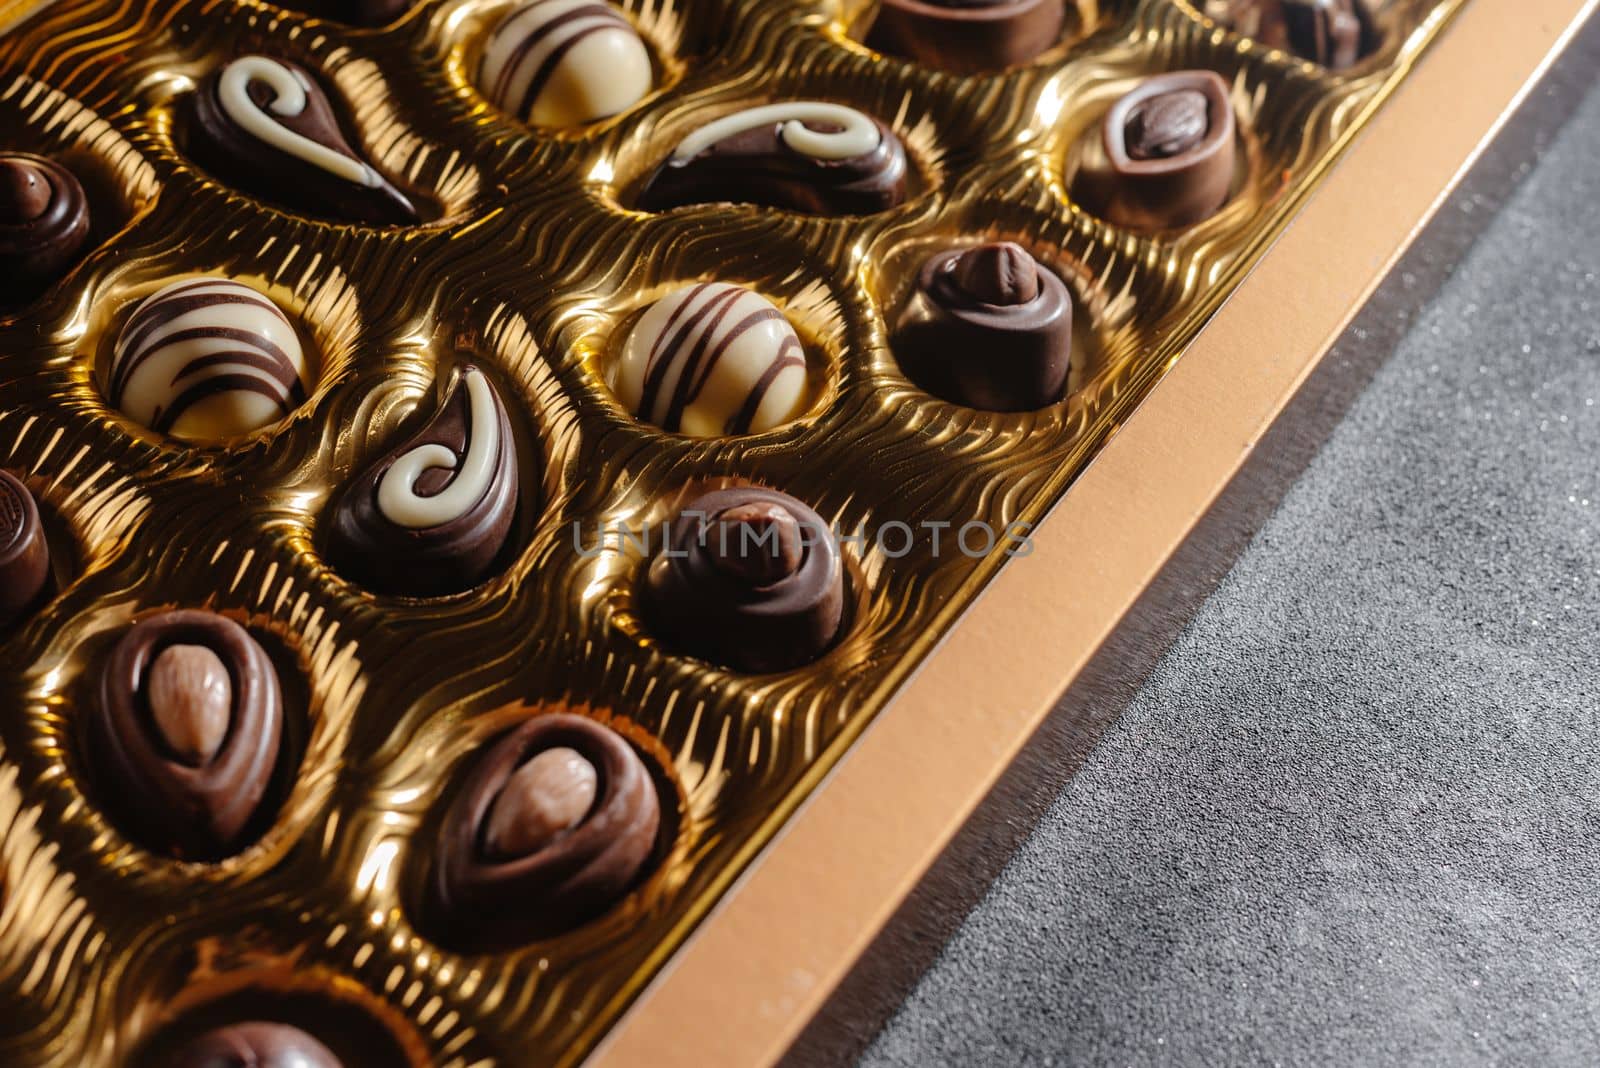 A box of different chocolates. Chocolate assortment mix on the black table, top view.